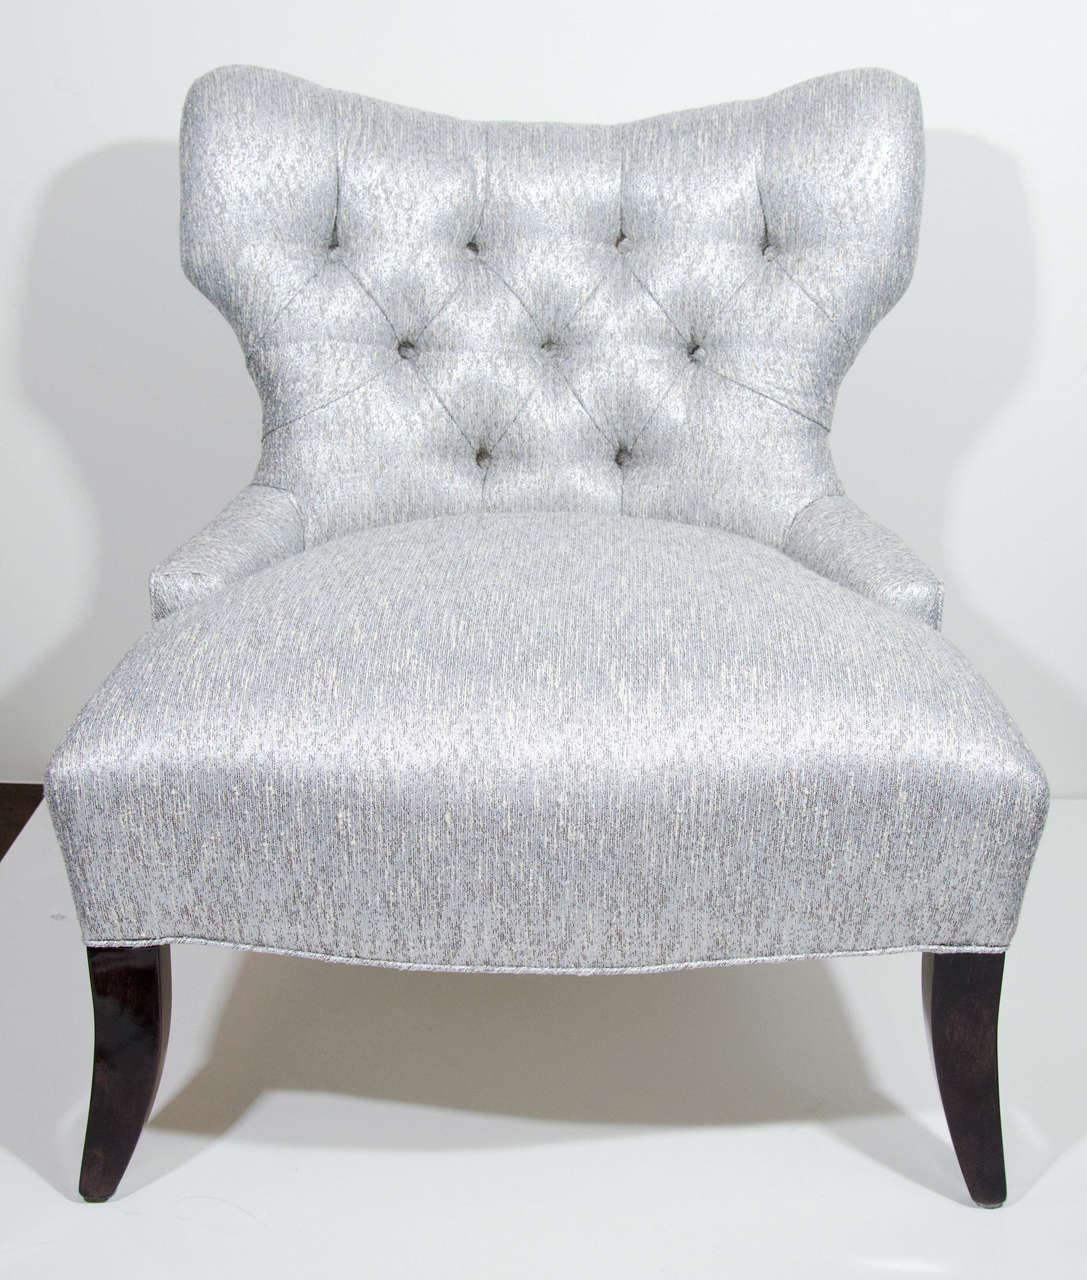 Elegant slipper chairs with shield back design and tufted details.  
Newly upholstered in a metallic grey and ivory boucle fabric with woven platinum fibers and with splayed ebonized walnut legs. The subtle curves combine to make this piece